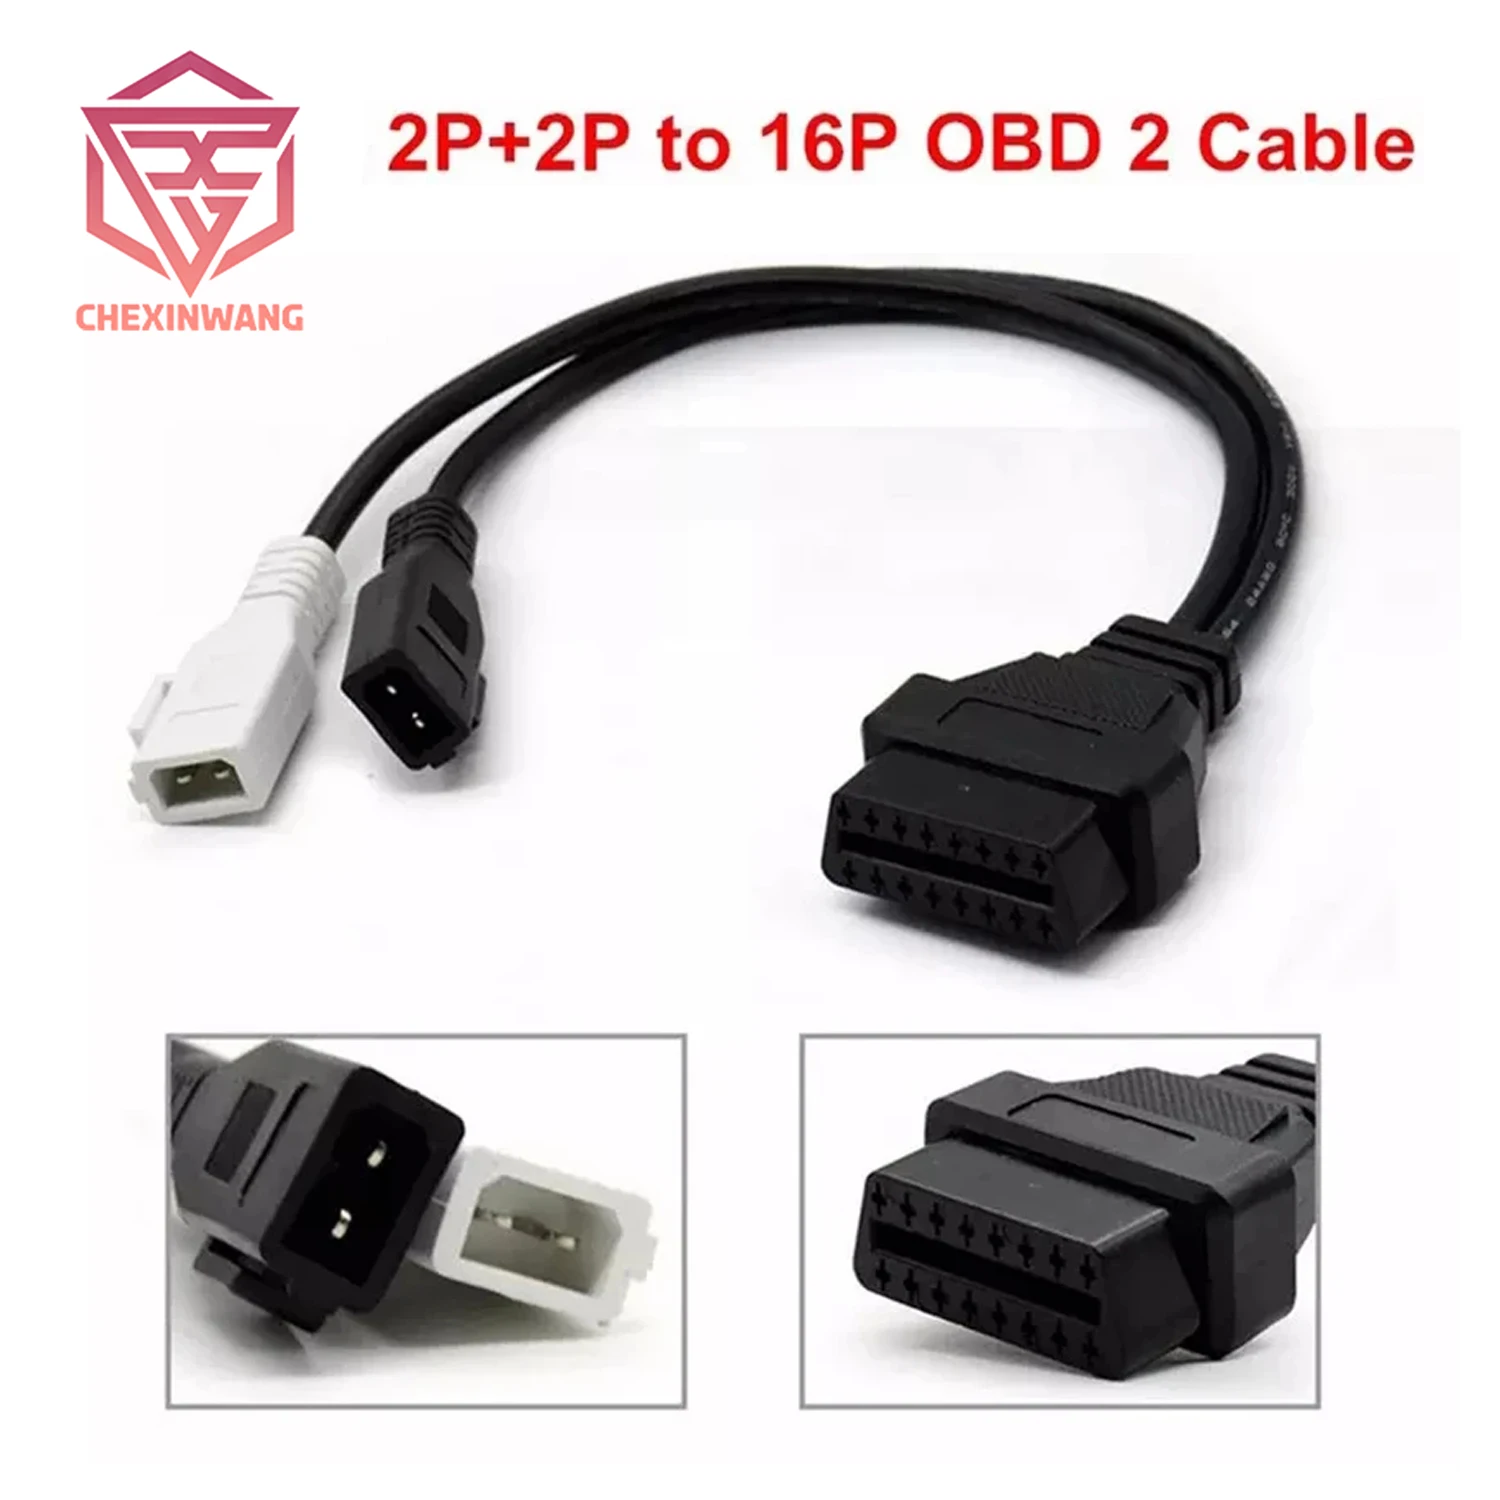 

2P+2P to 16Pin OBD2 Cable VAG Adapter 2X2 OBD1 OBD2 Car Diagnostic Cable 2P+2P to 16Pin Female Connector for W-V/Sk-oda